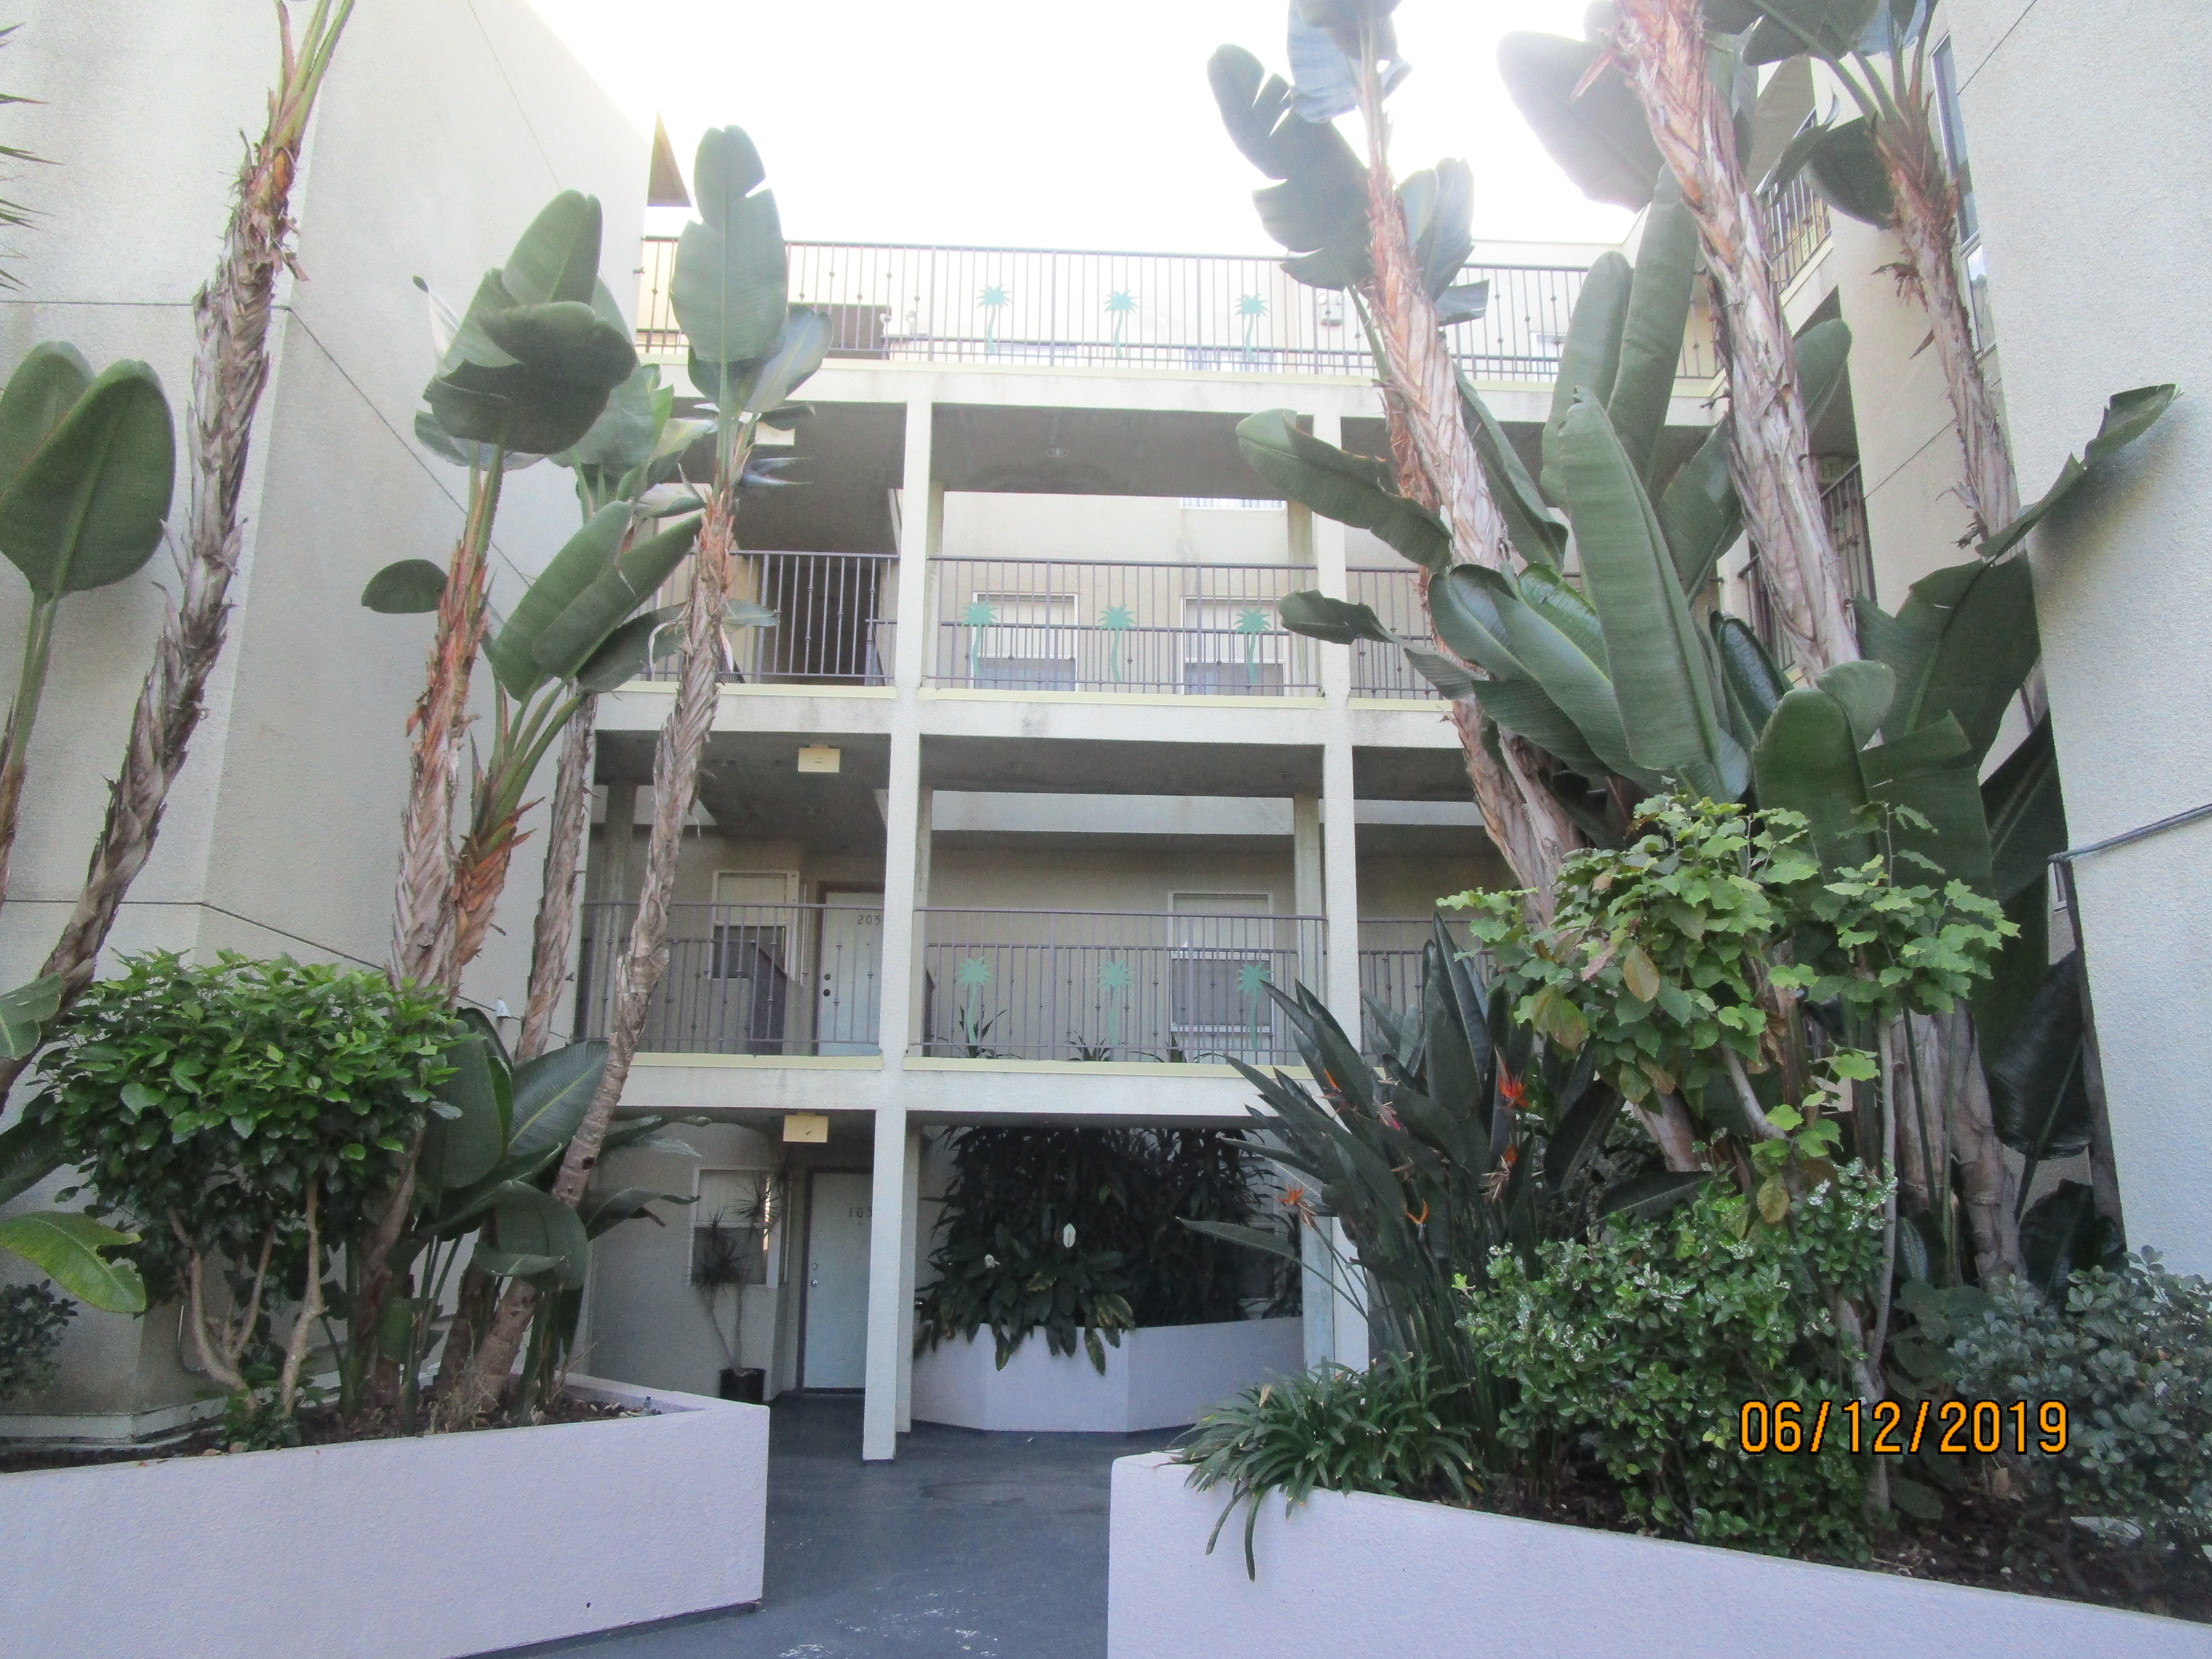 Front view of a patio, concrete floor, built in concrete planters on the left and right side.